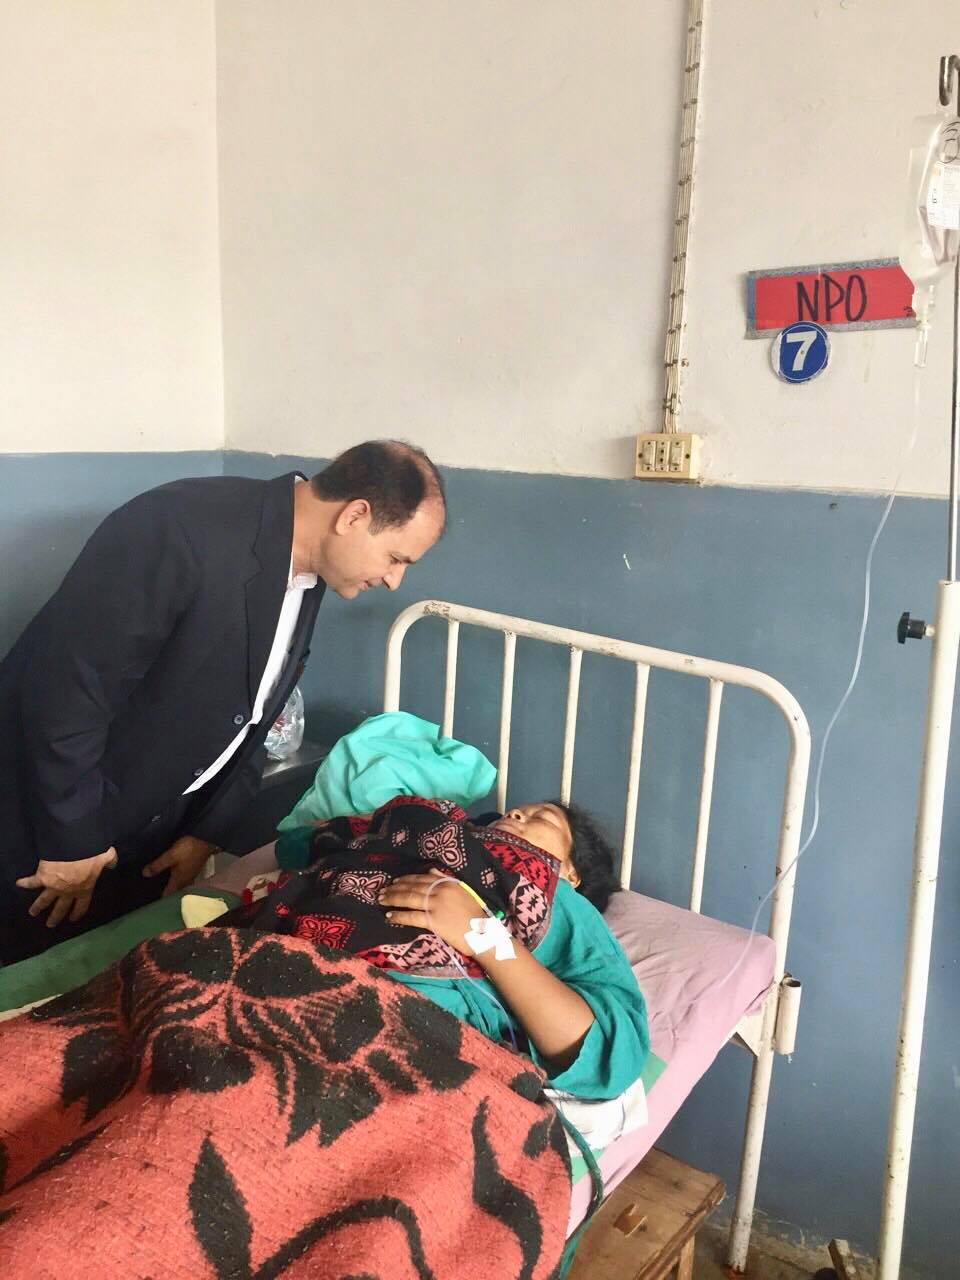 Bedside care for mother (Mrs. Air Nepali) who was rescued from a high hill district (Mustang) by a helicopter. The mother and baby saved, an incredible outcome. Video documentary; link https://youtu.be/lV7pD4ObV2A.